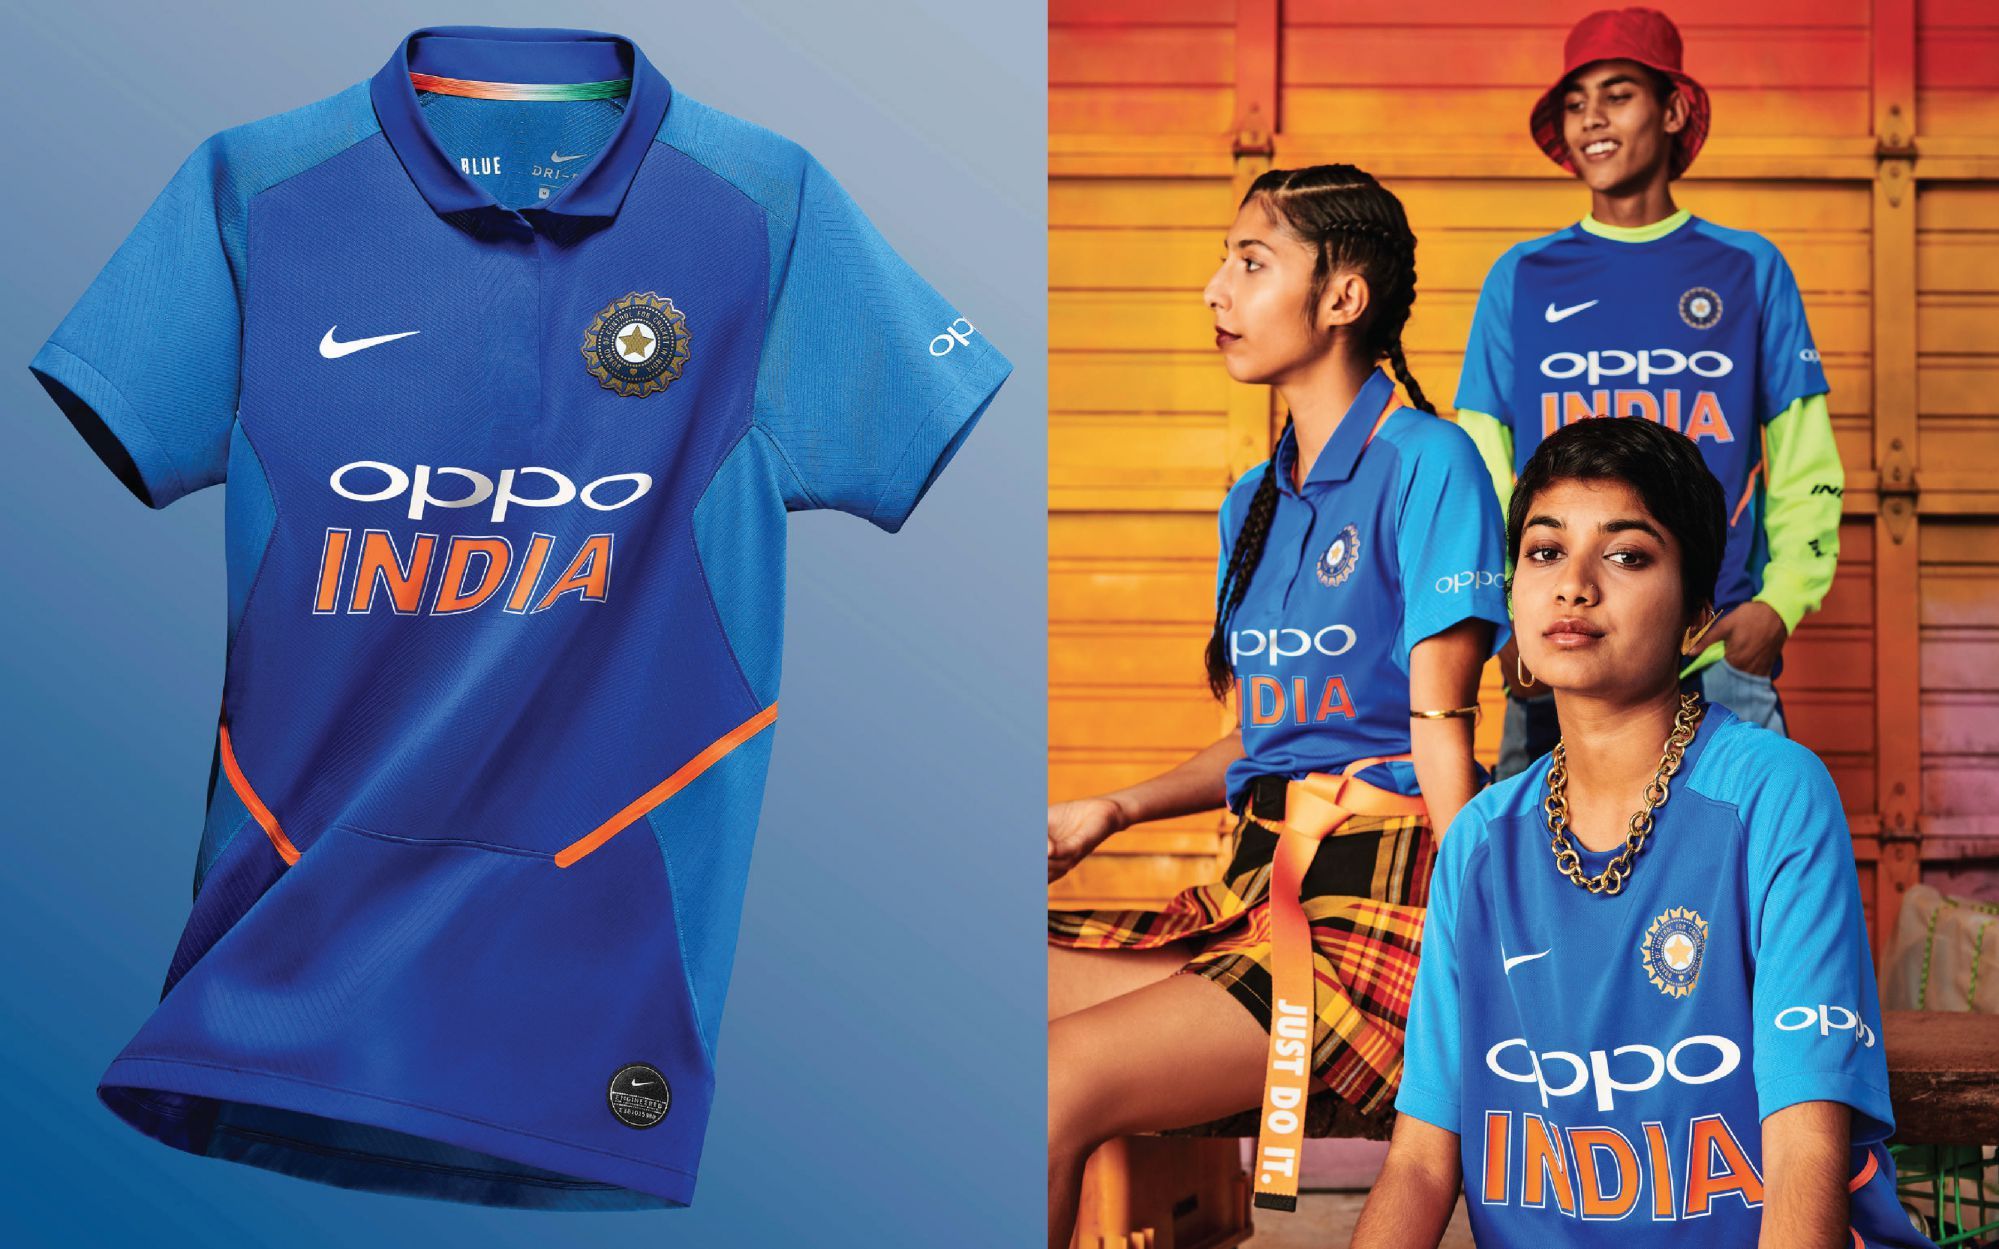 Nike's jersey the National cricket team